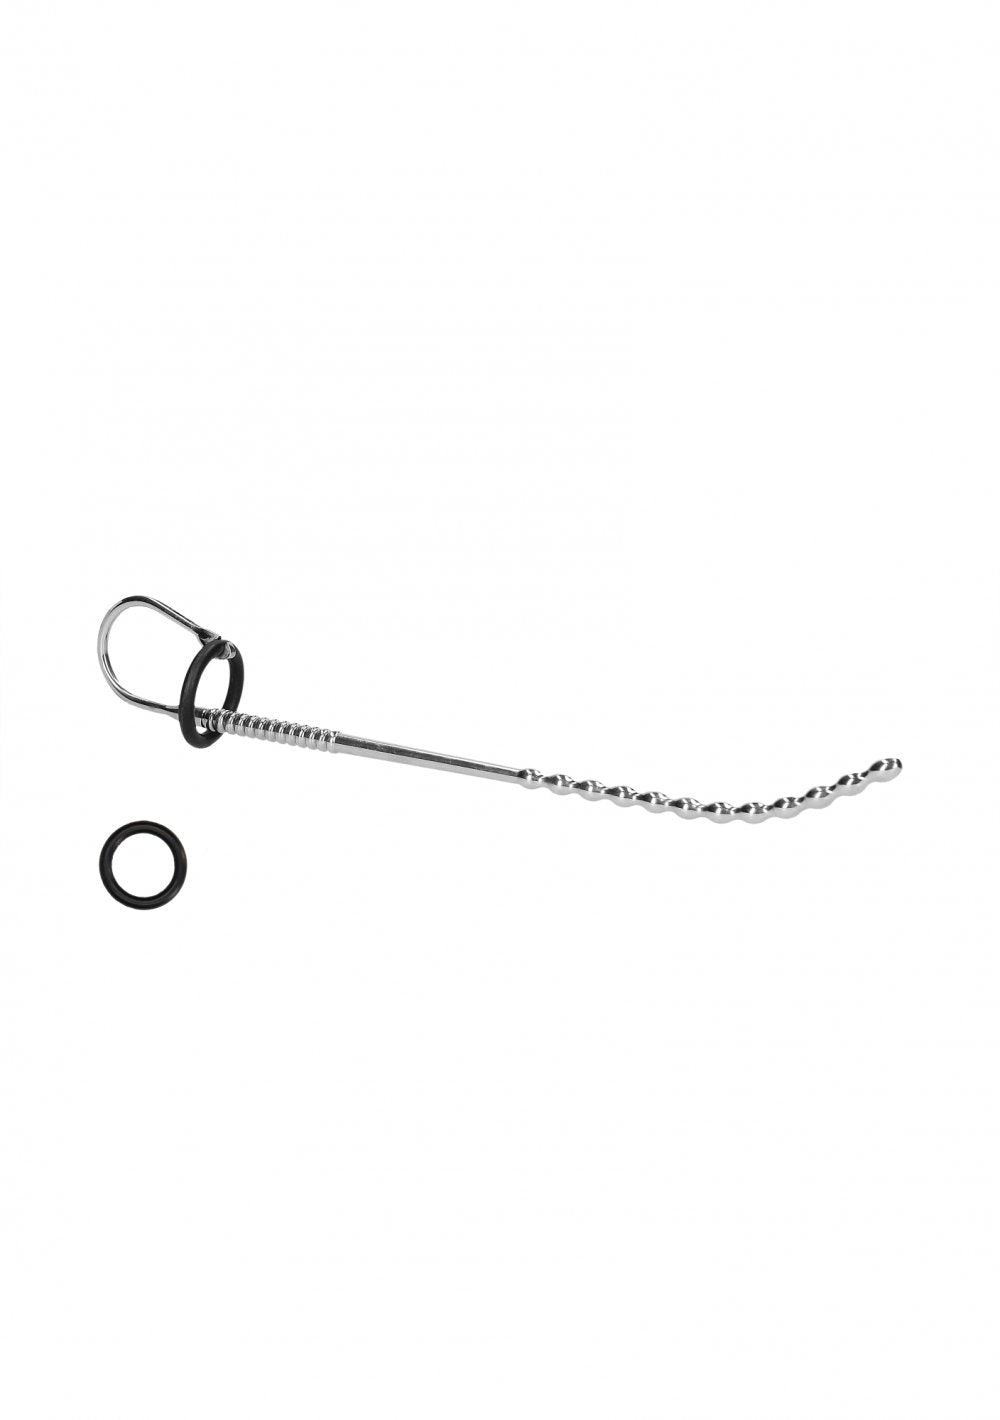 Stainless Steel Dilator with Glans Ring - 0.3" / 7 mm